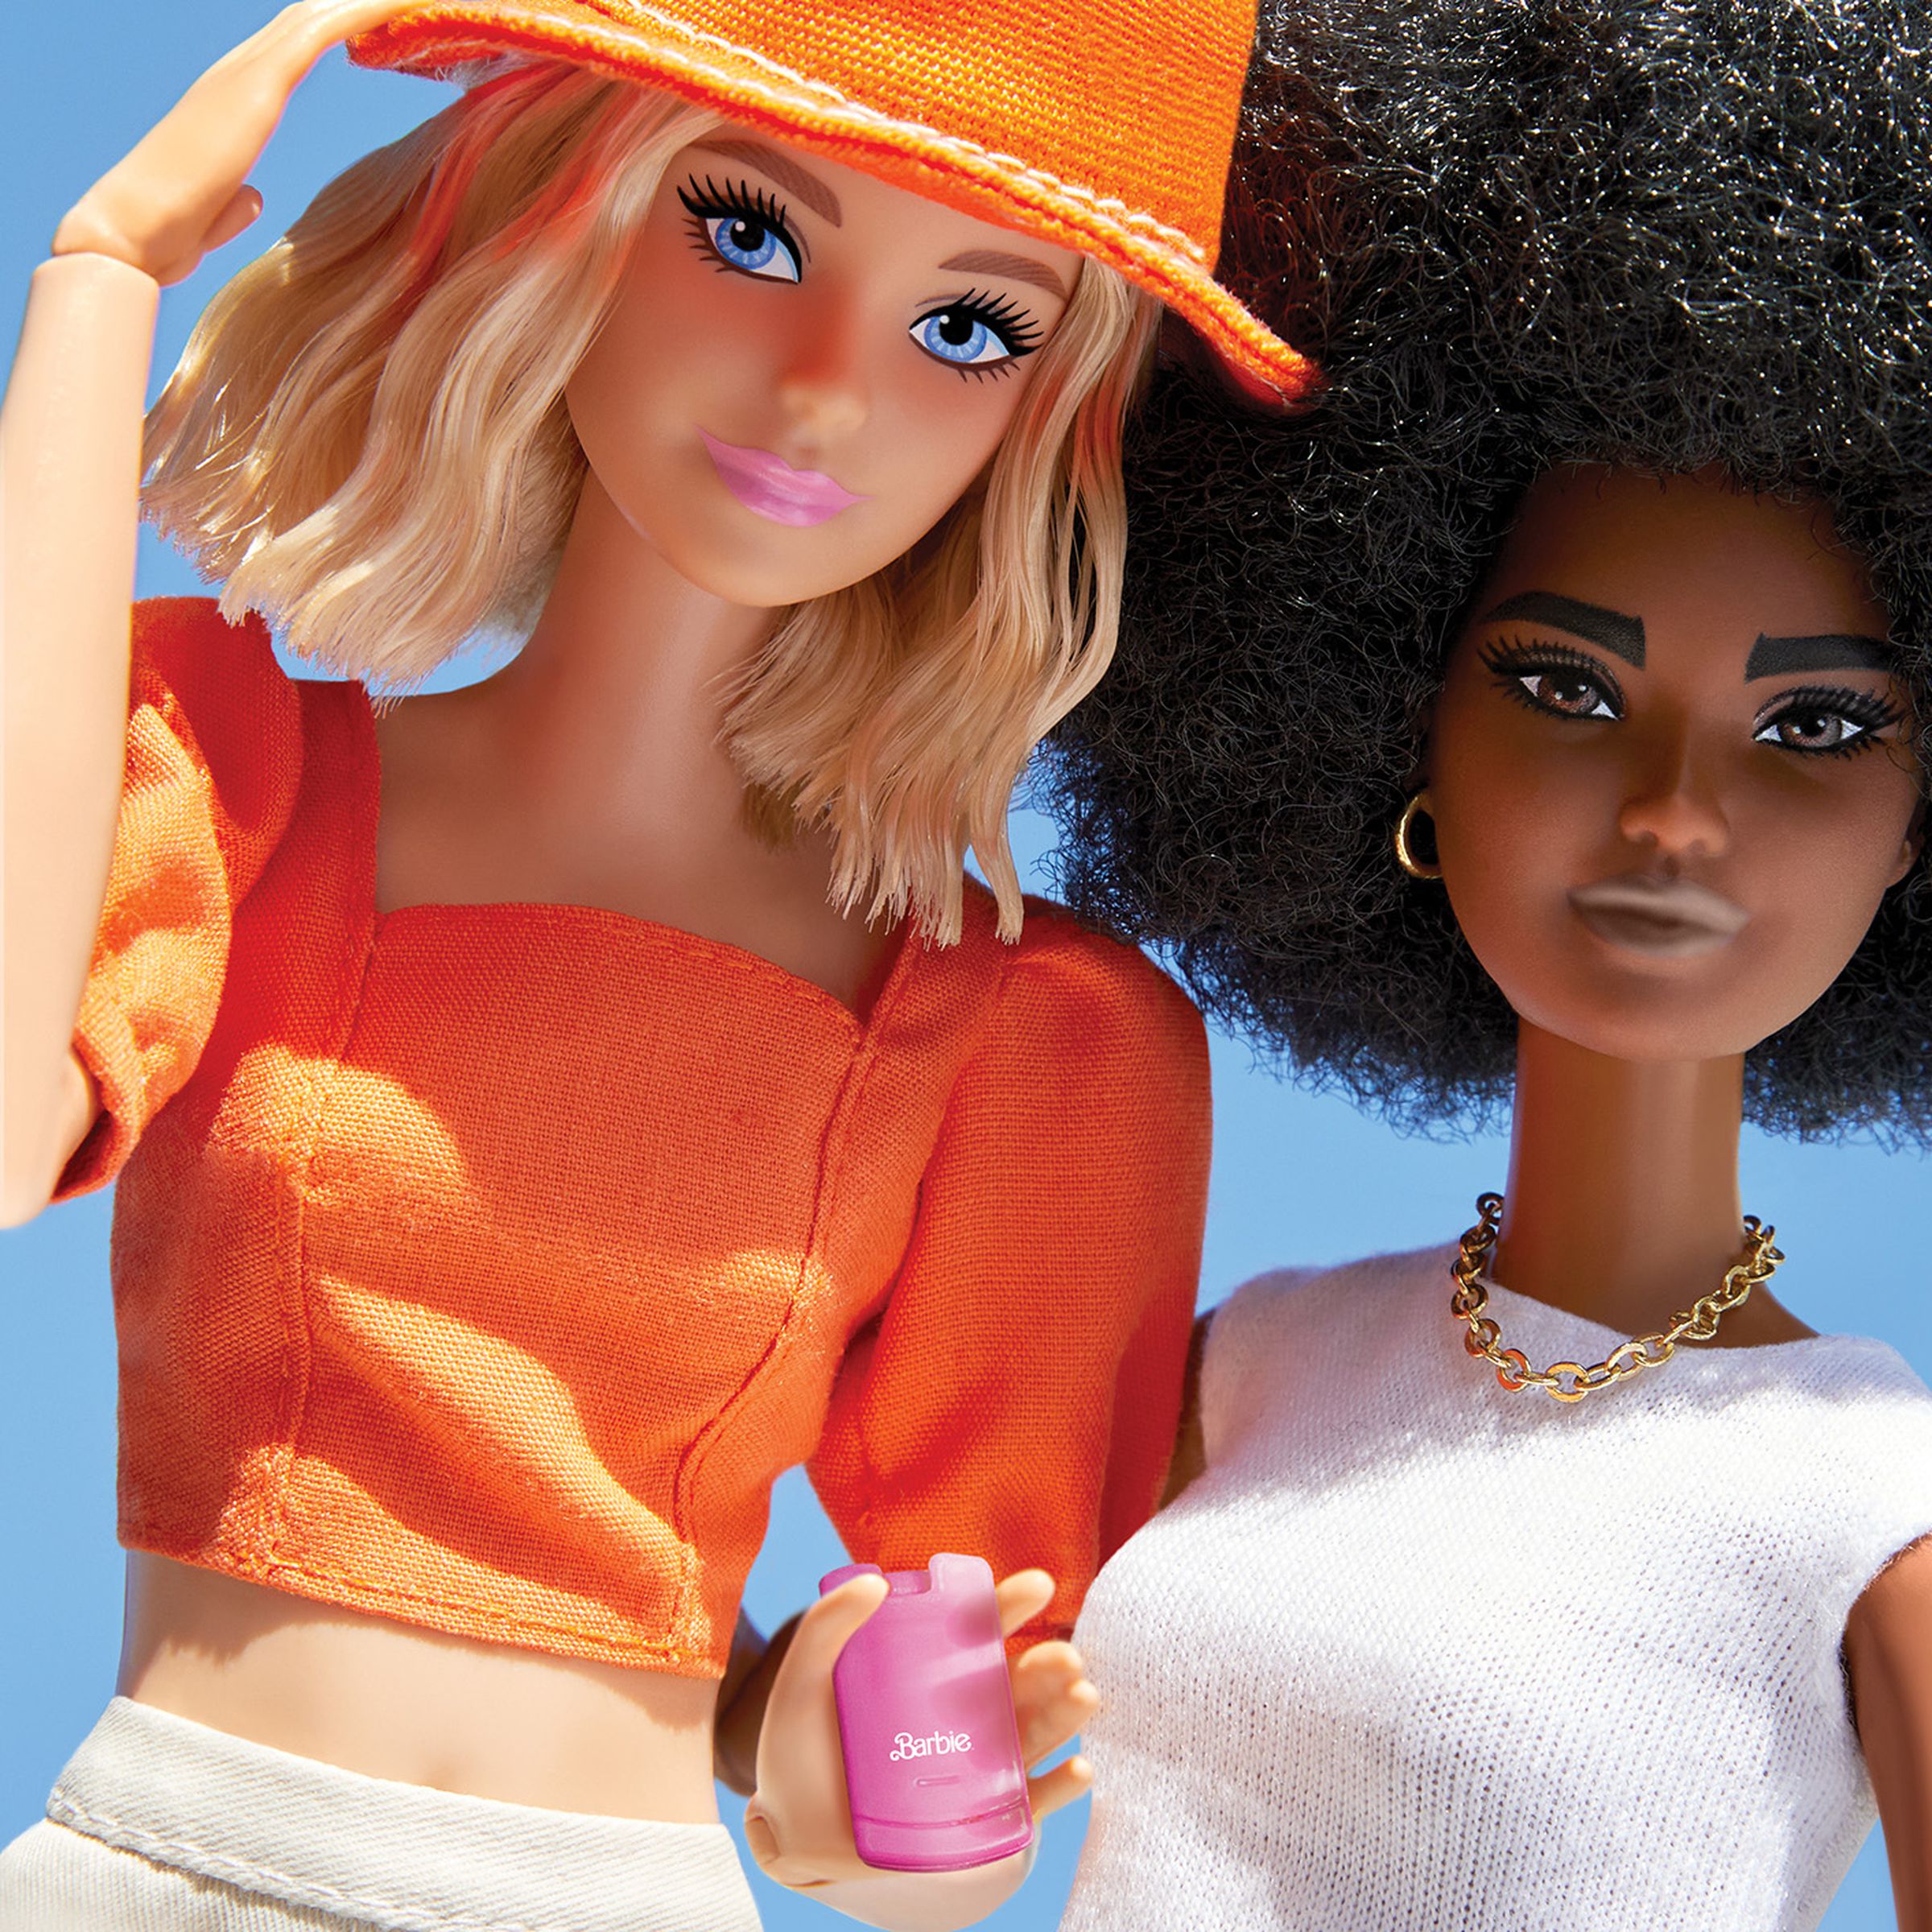 Two barbie dolls, one holding a toy phone.